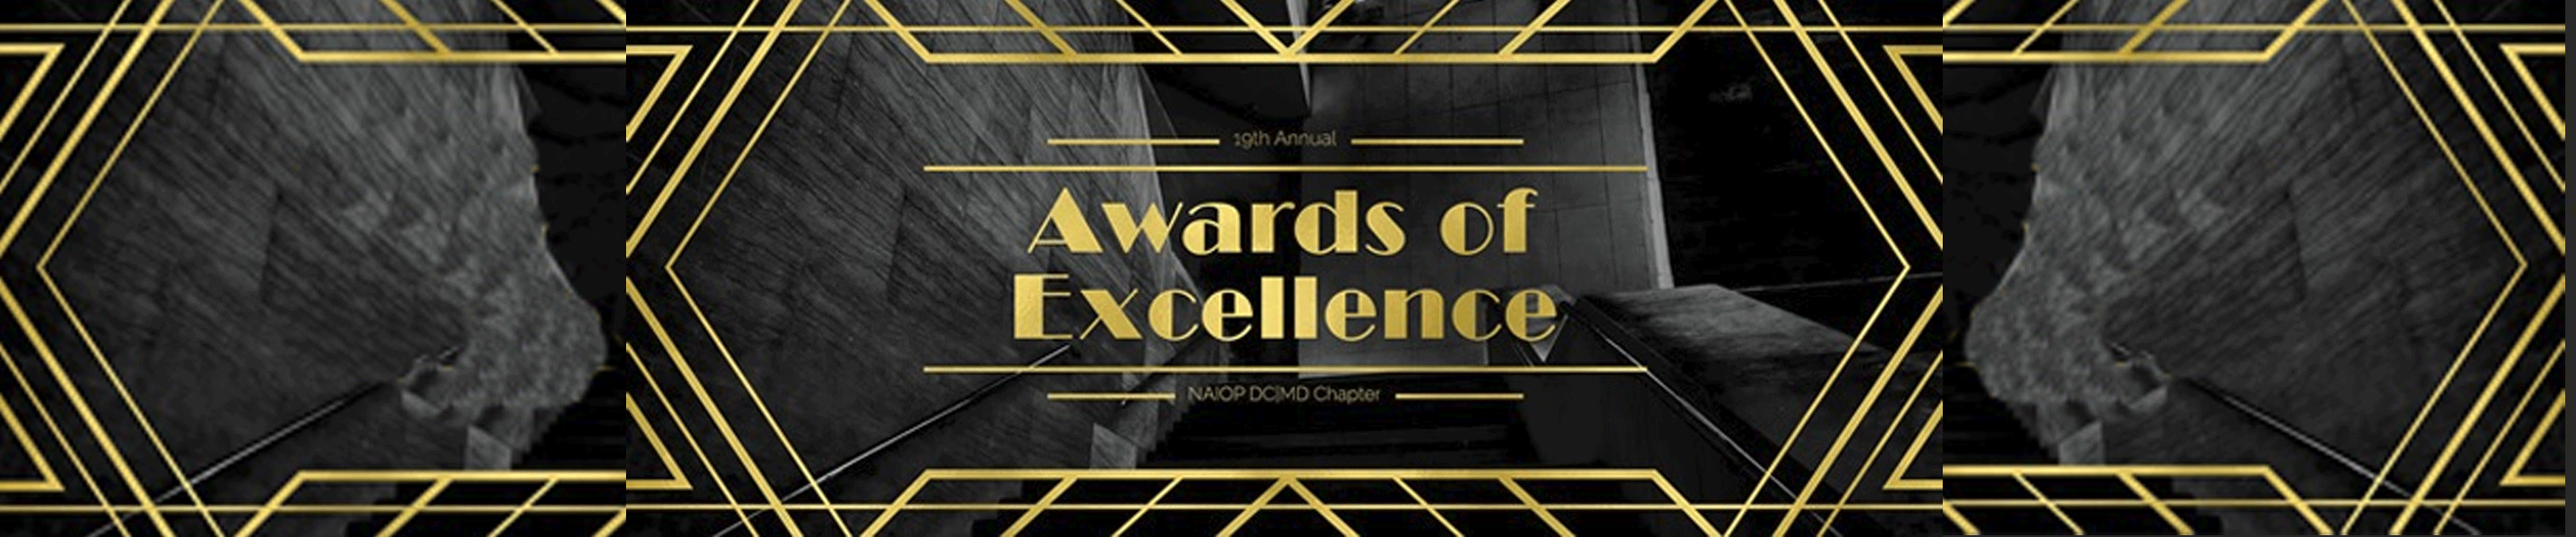 Awards of Excellence 2020